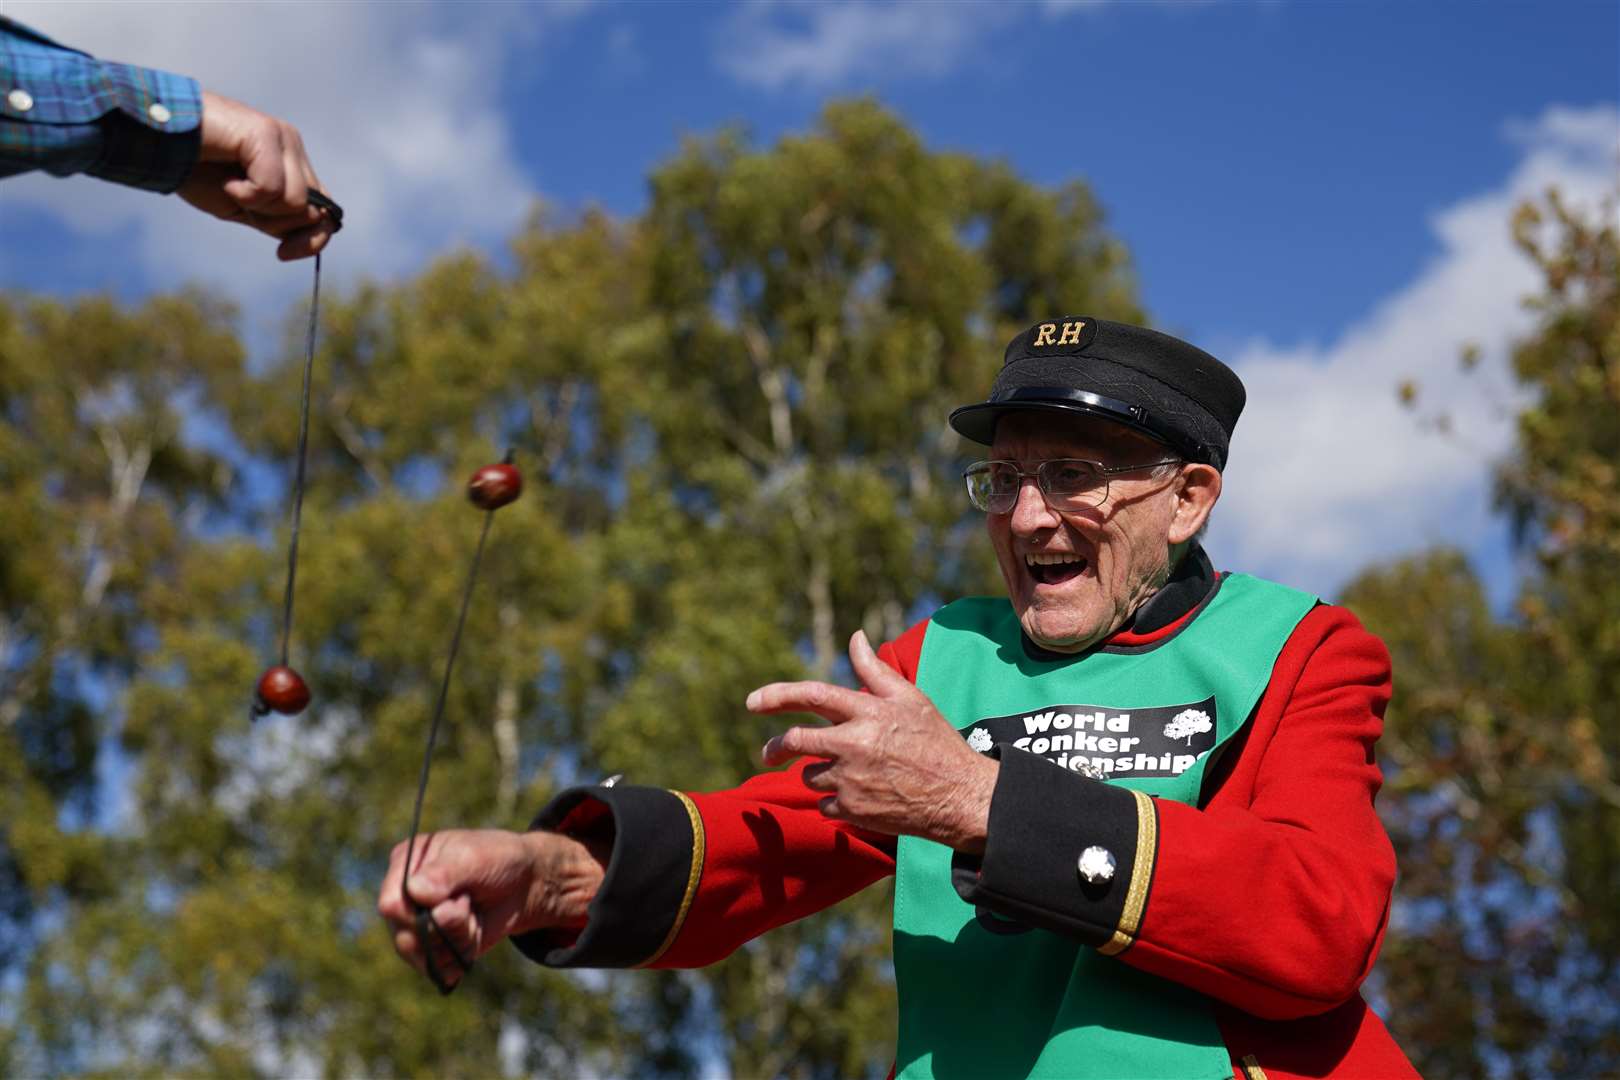 Chelsea pensioner John Riley, 92, used his years of experience during the annual World Conker Championships at the Shuckburgh Arms in Southwick, Peterborough (Joe Giddens/PA)